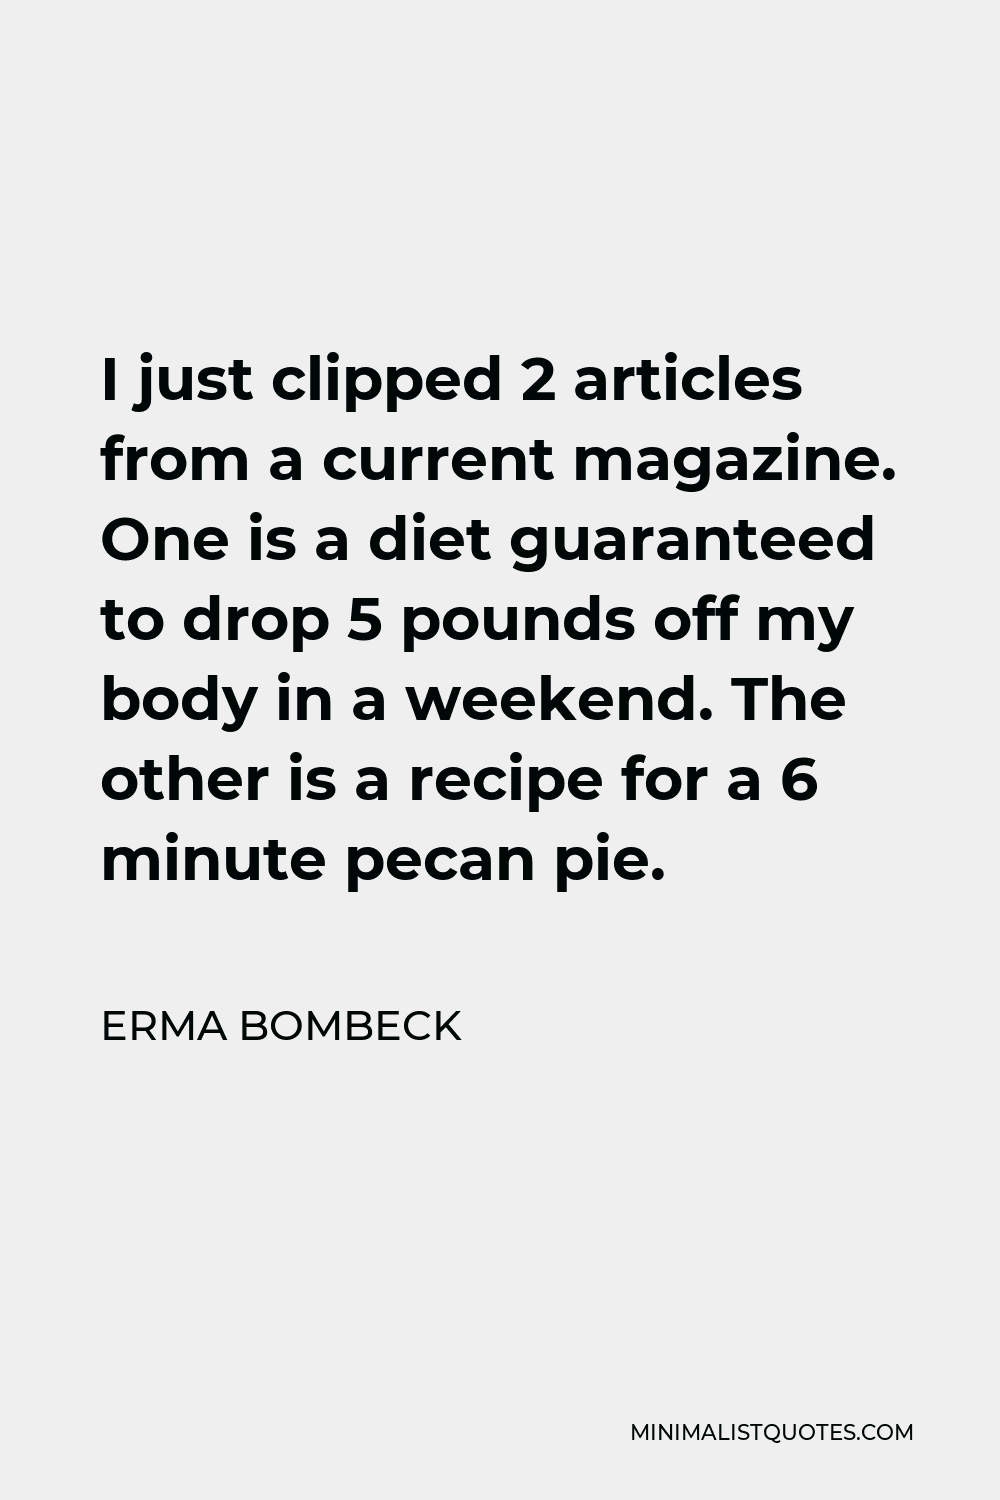 Erma Bombeck Quote - I just clipped 2 articles from a current magazine. One is a diet guaranteed to drop 5 pounds off my body in a weekend. The other is a recipe for a 6 minute pecan pie.